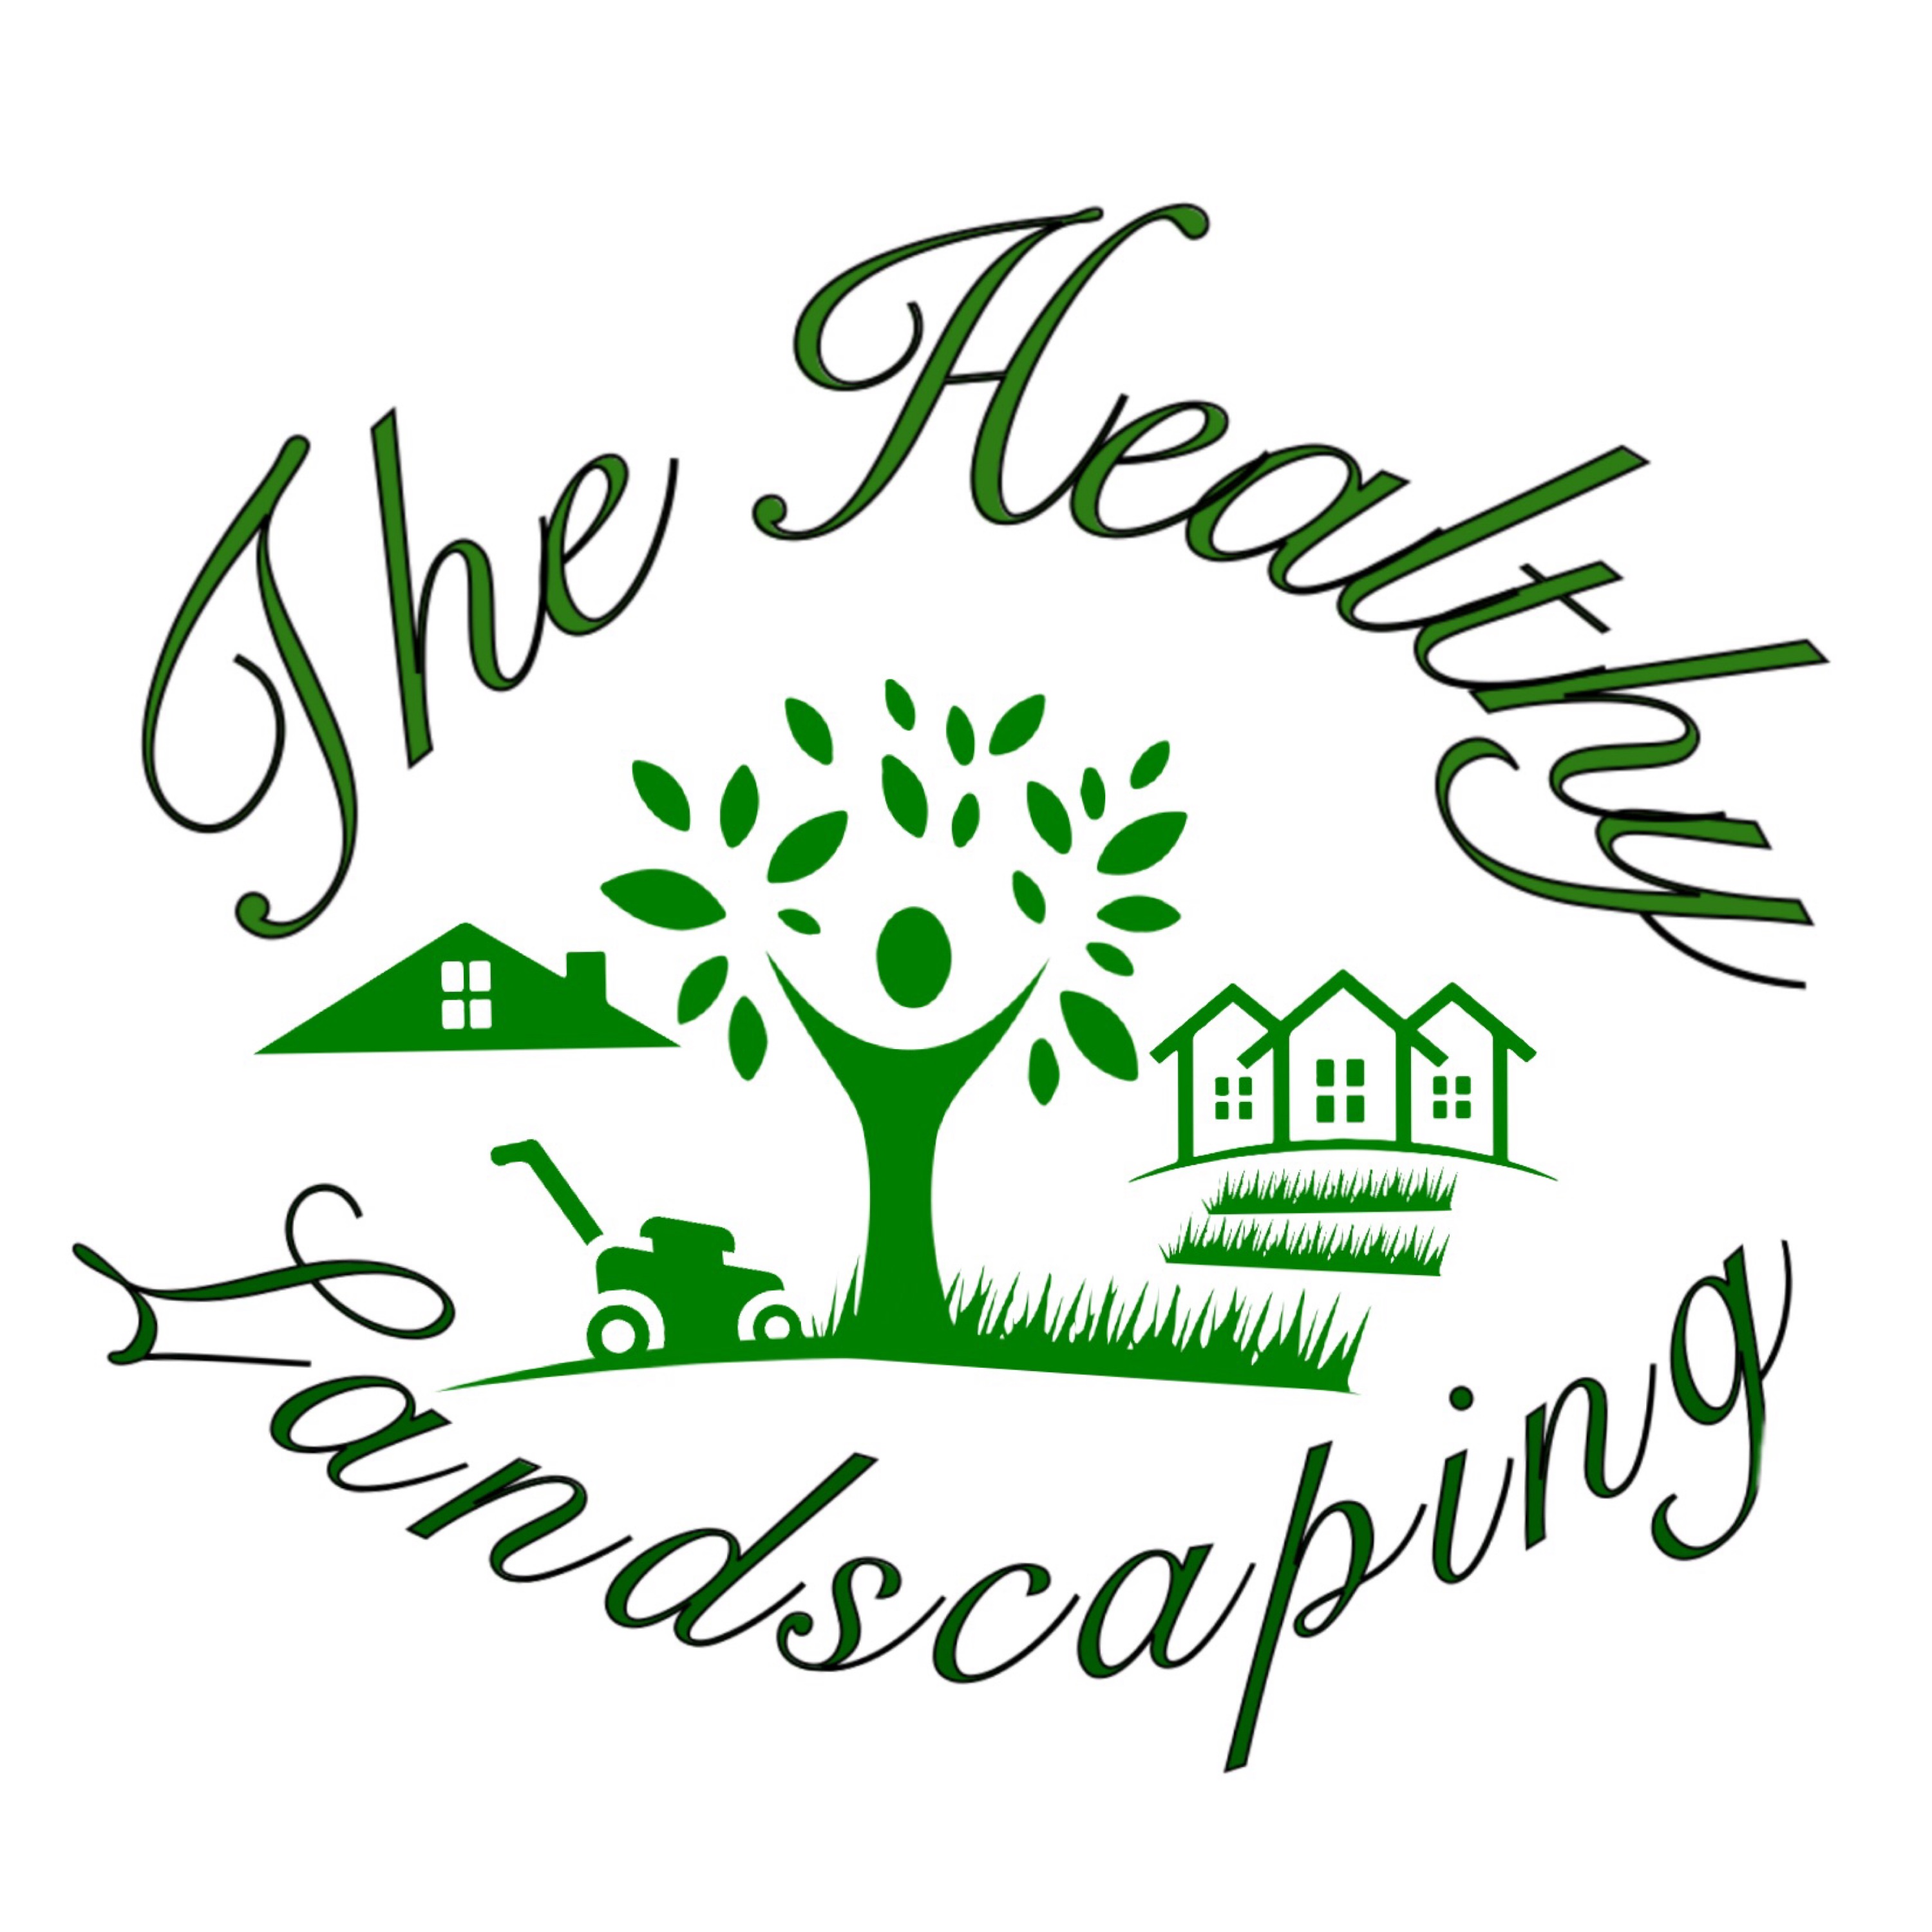 The Healthy Landscaping Logo